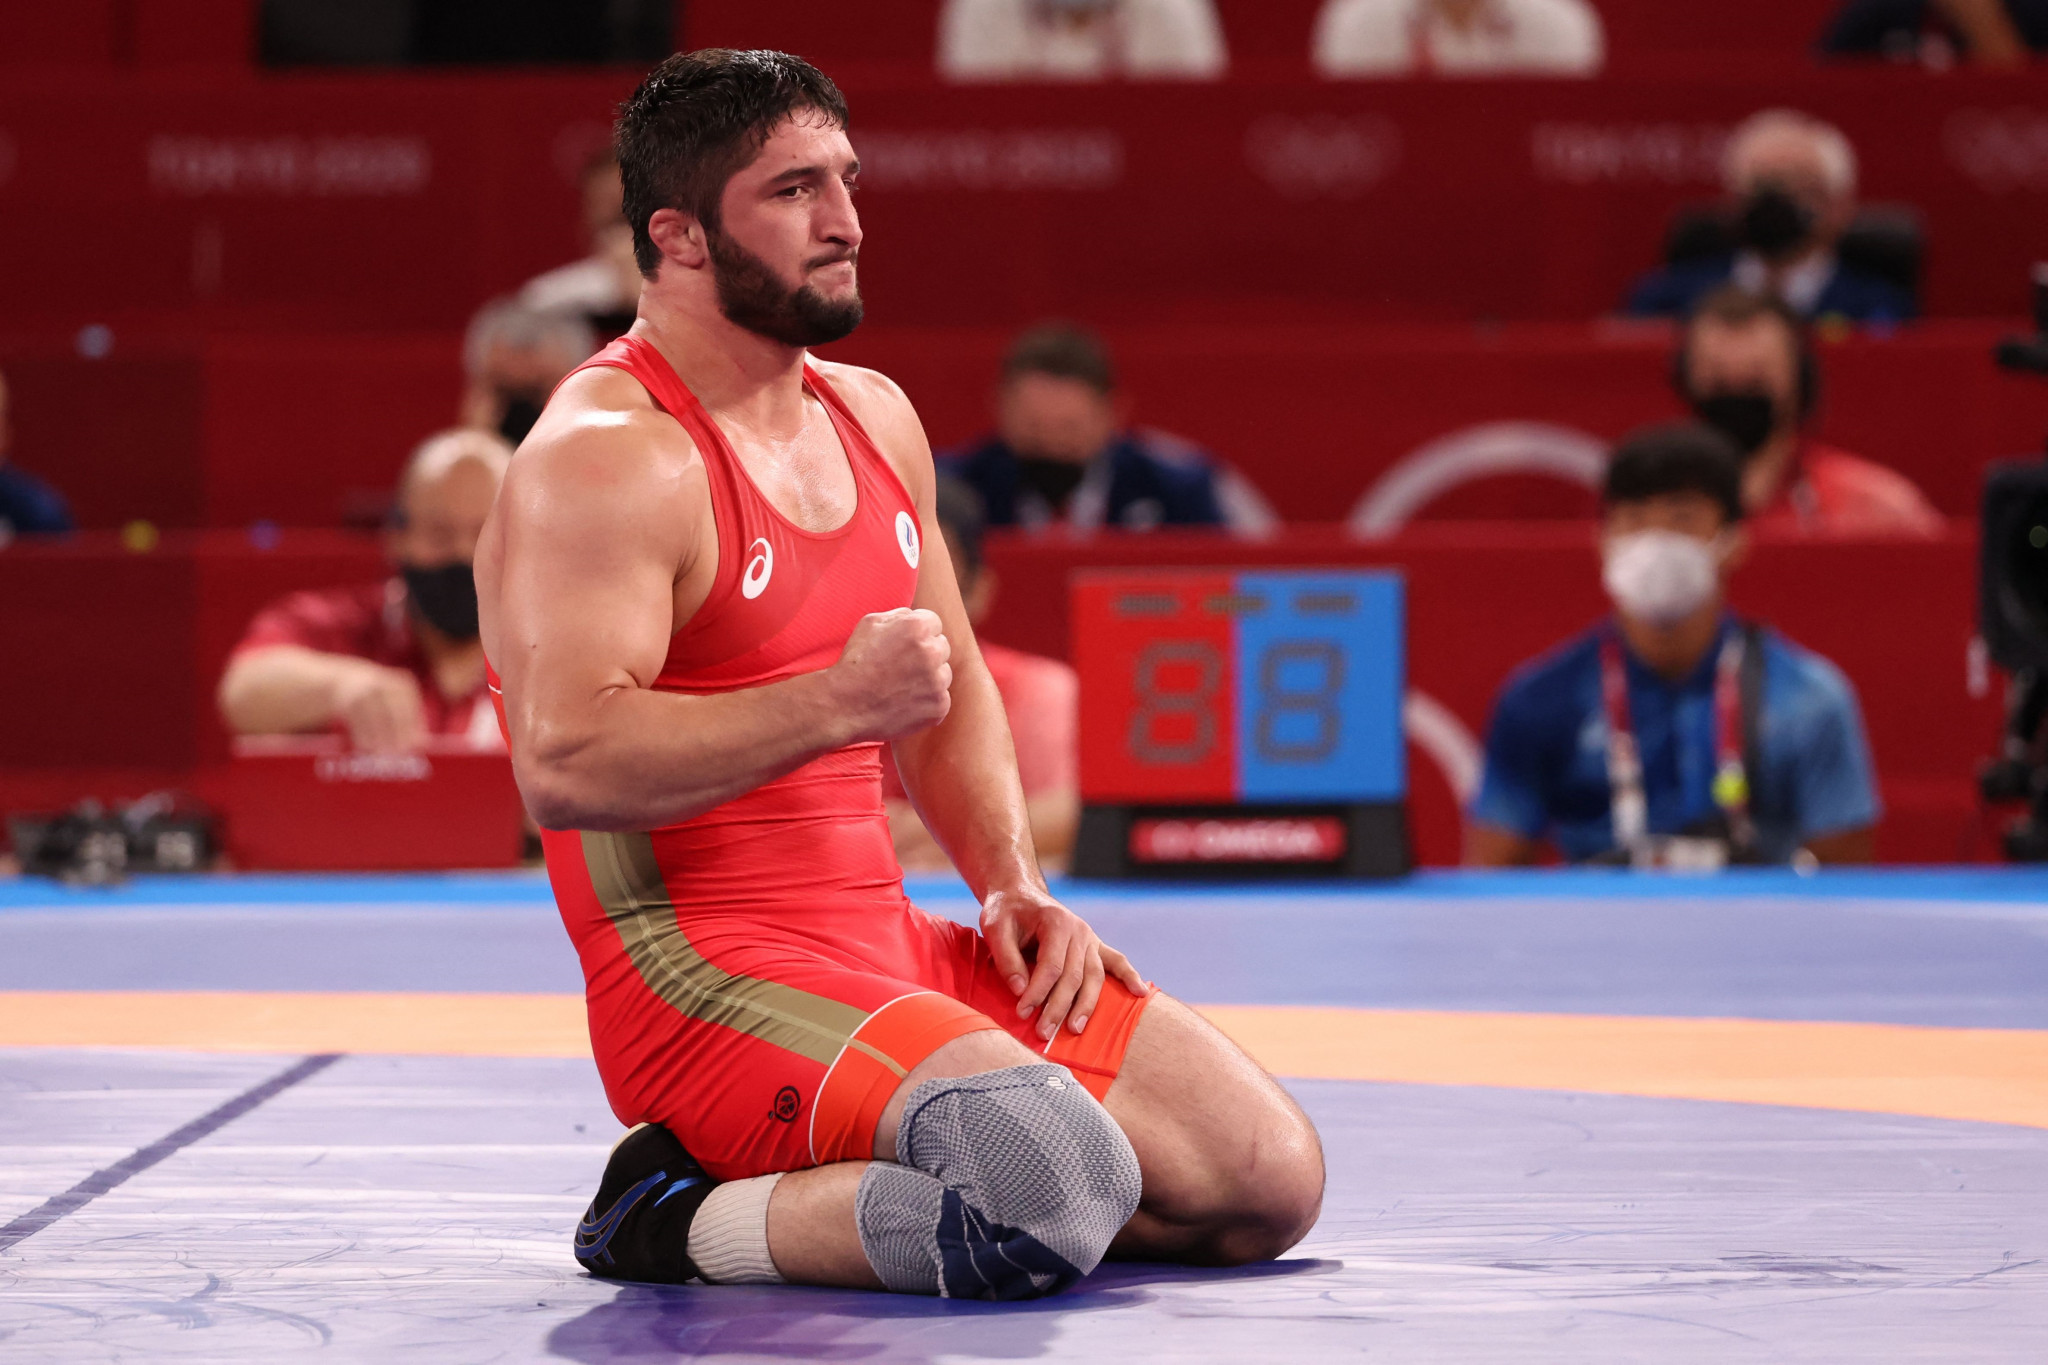 Questions unanswered over Russian participation at World Wrestling Championships